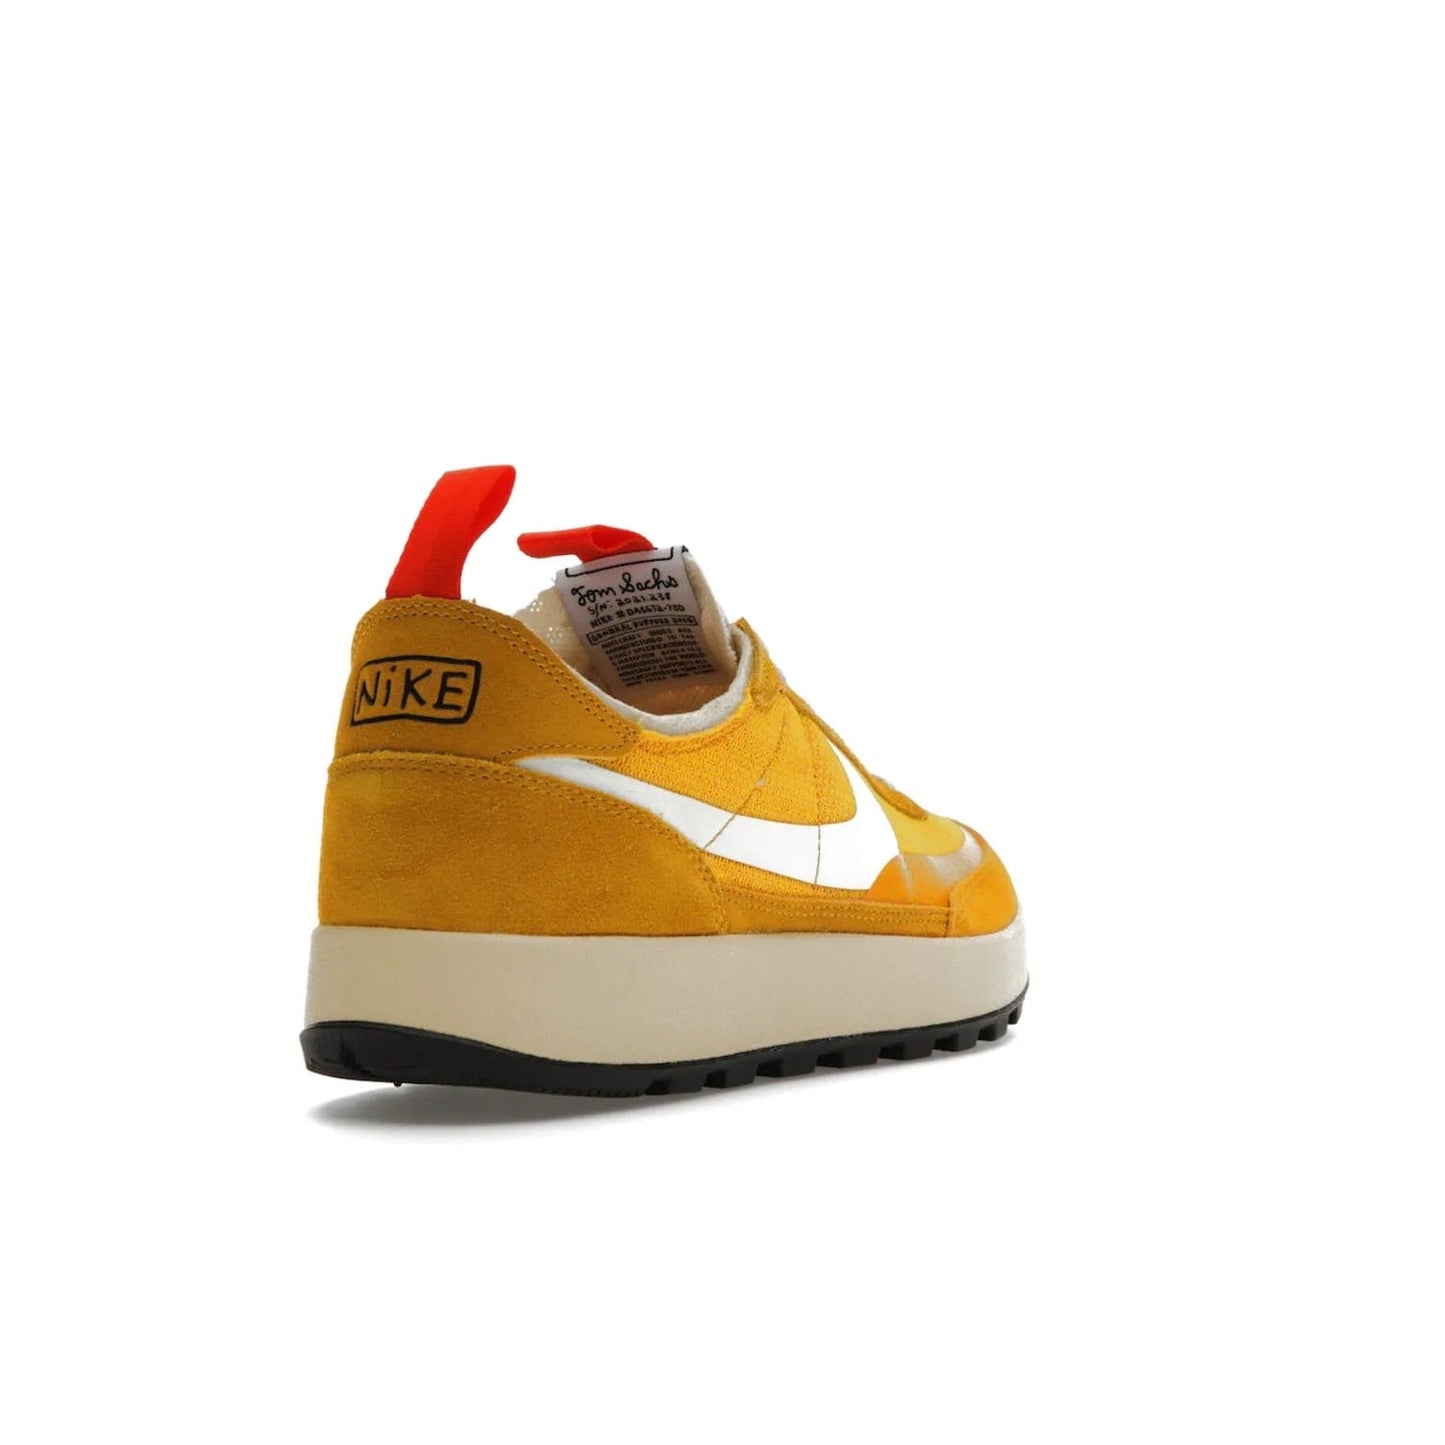 NikeCraft General Purpose Shoe Tom Sachs Archive Dark Sulfur - Image 31 - Only at www.BallersClubKickz.com - Collab between Nike & Tom Sachs. The NikeCraft General Purpose Shoe features dark sulfur mesh upper, suede overlays, contrasting white Swoosh and orange tabs. EVA cushioning & black waffle-traction rubber outsole ensures performance. Stylish & perfect for any occasion, the shoe released September 2, 2022.